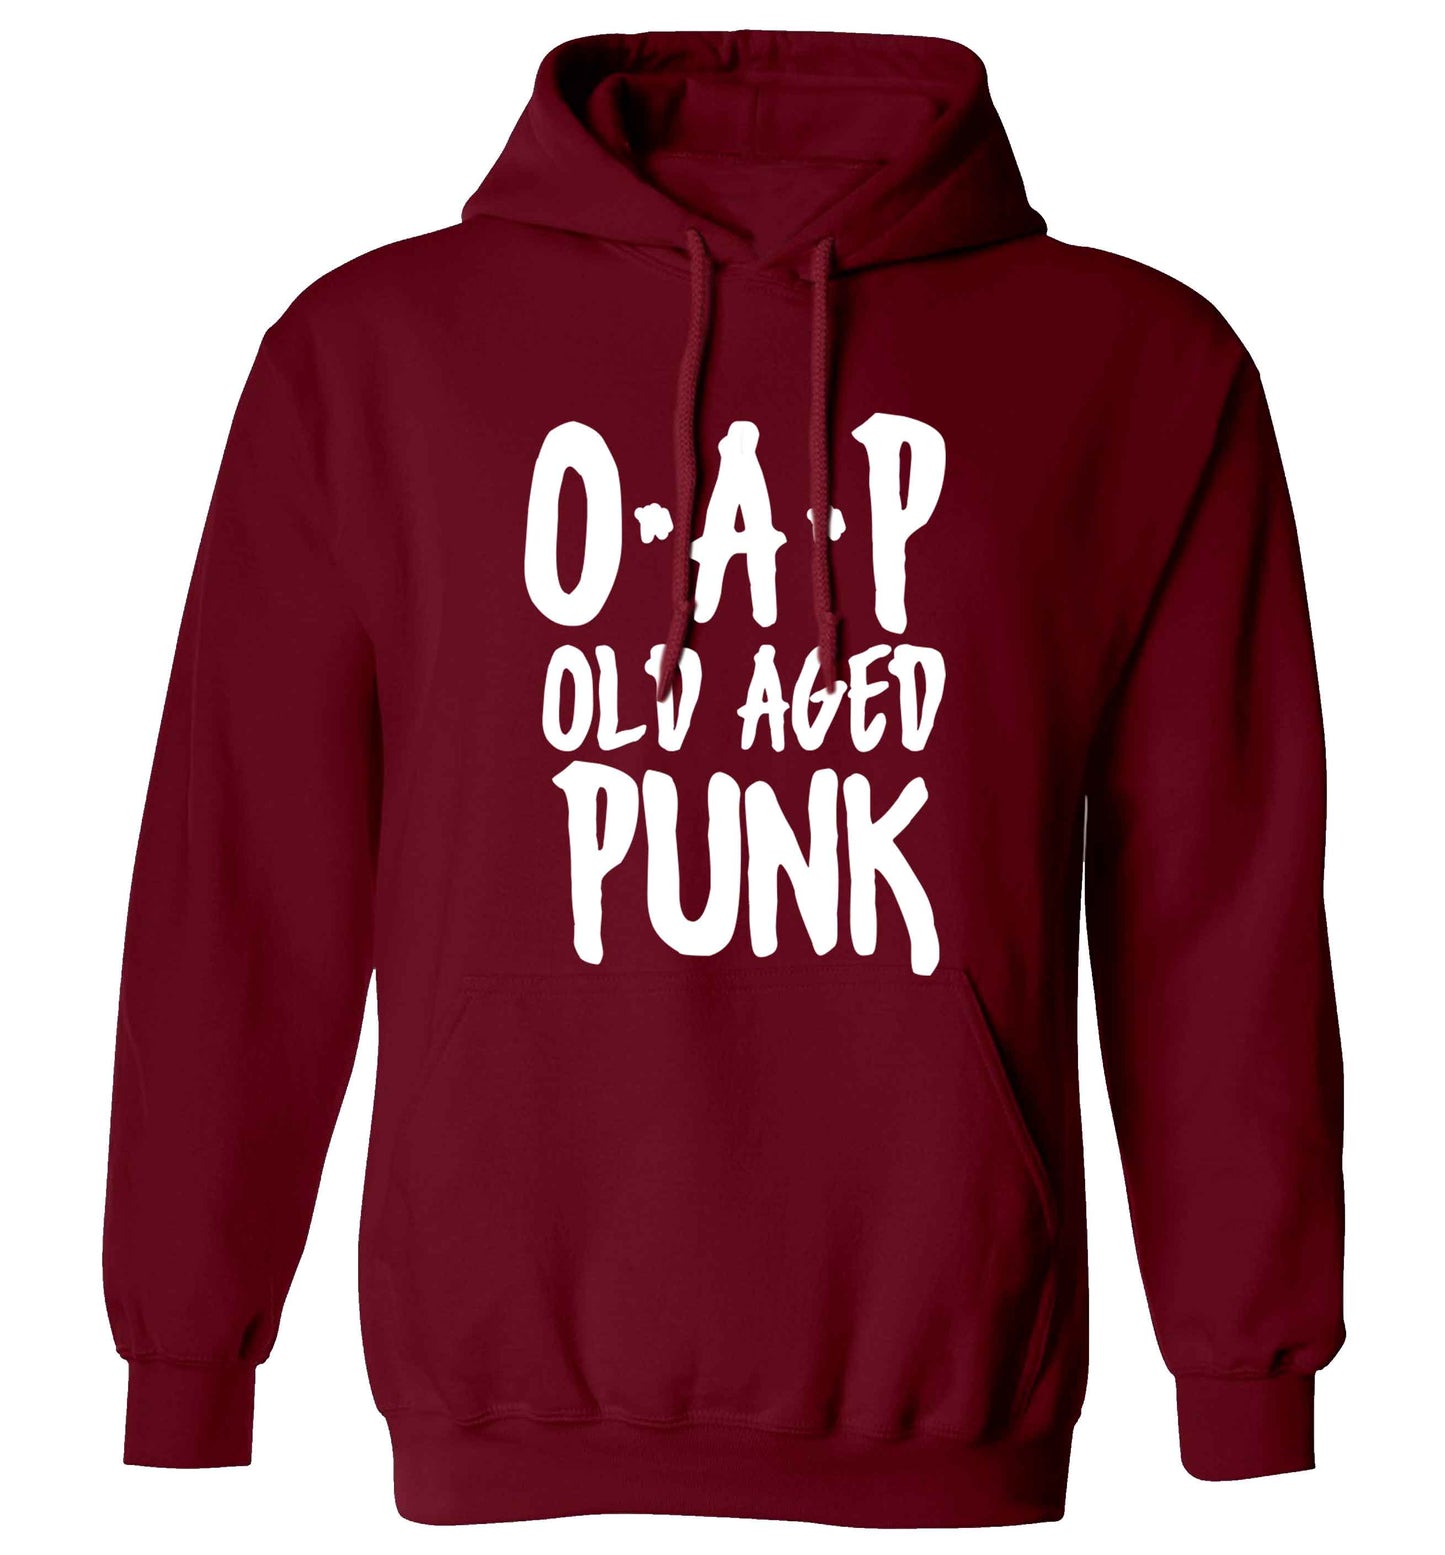 O.A.P Old Age Punk adults unisex maroon hoodie 2XL